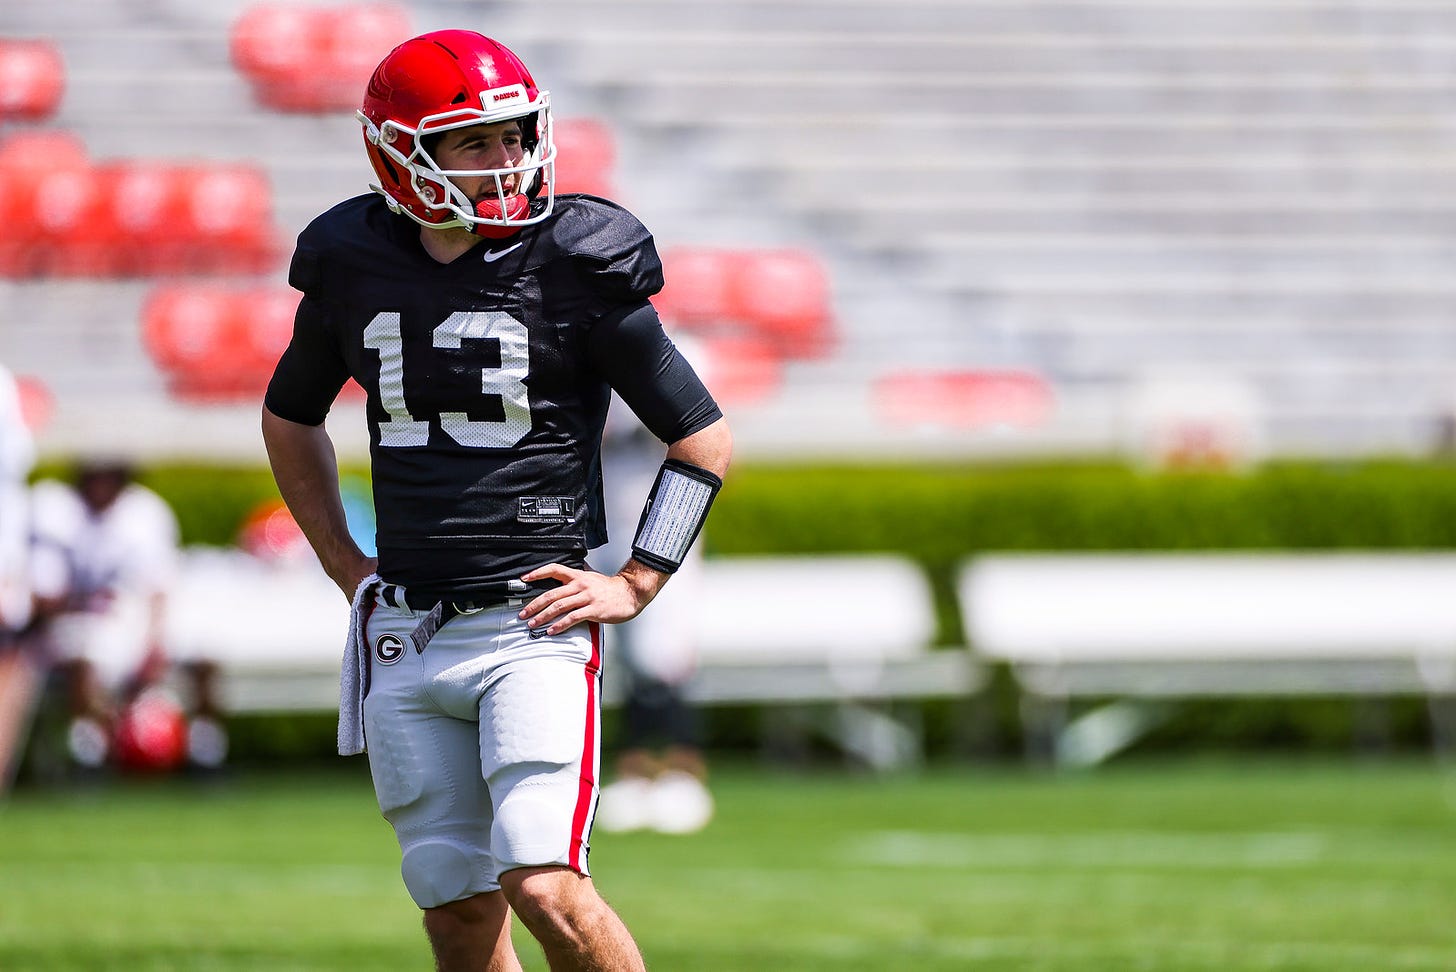 Georgia quarterback Stetson Bennett (13) during the Bulldogs’ practice session on Dooley Field at Sanford Stadium in Athens, Ga., on Saturday, April 3, 2021. (Photo by Tony Walsh)